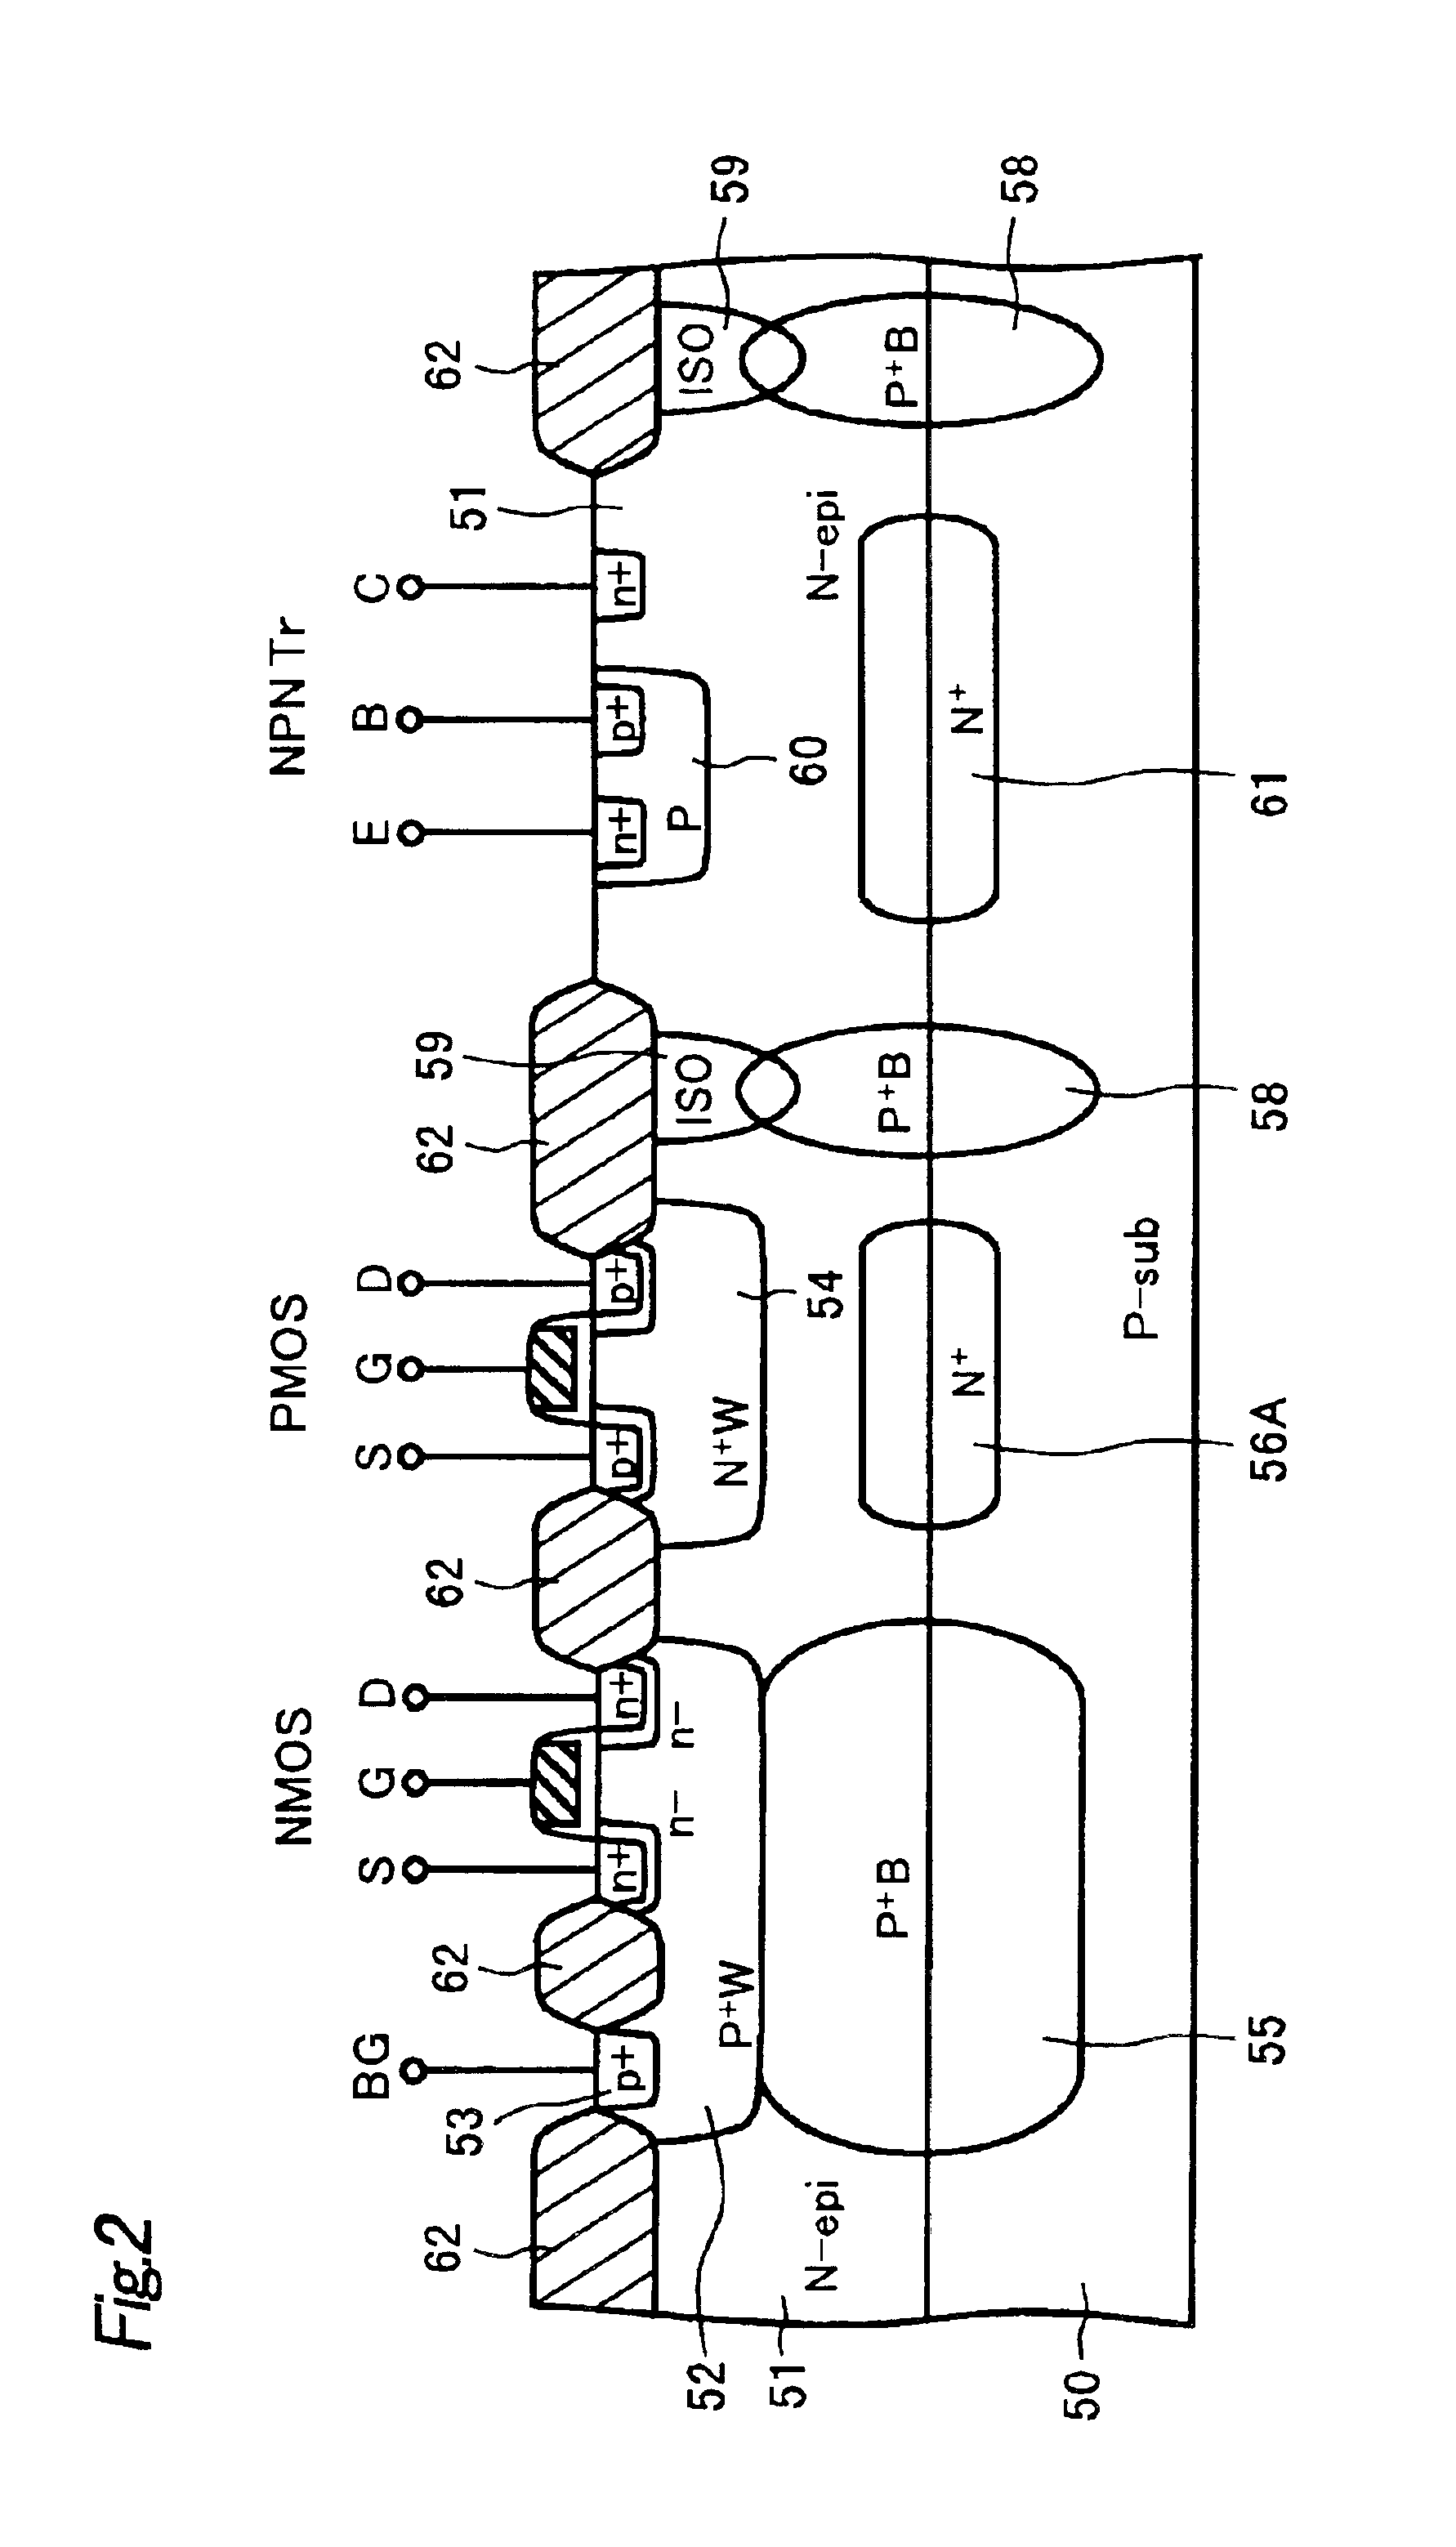 Charge pump device